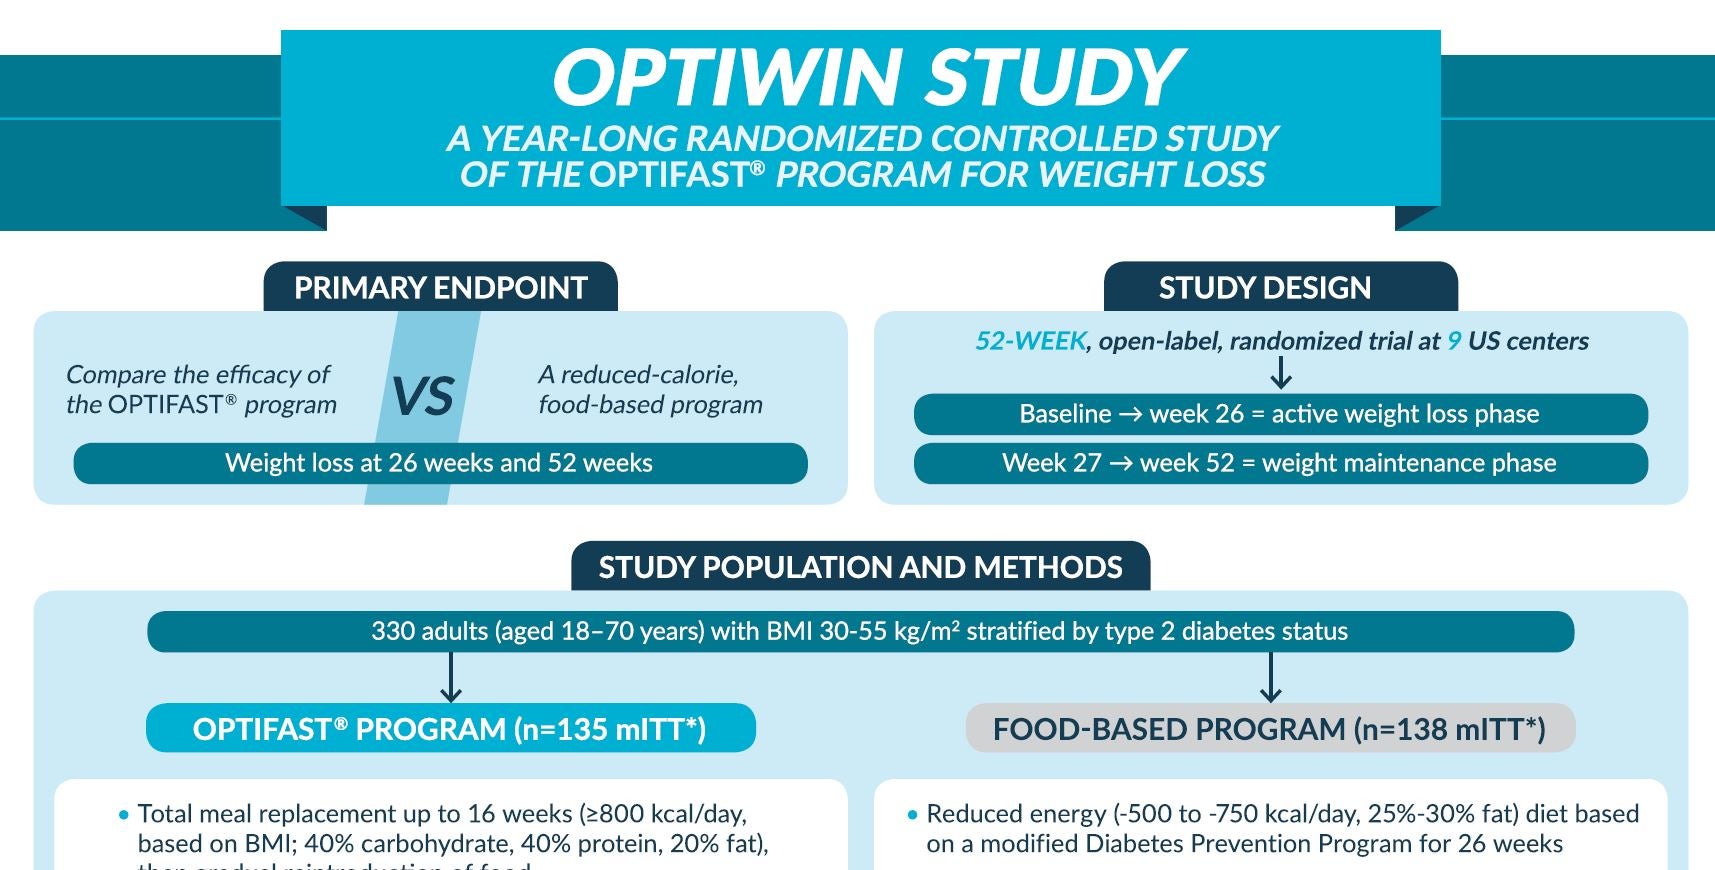 Effectiveness of a Total Meal Replacement Program (OPTIFAST® Program) on Weight Loss:  Results from the OPTIWIN Study